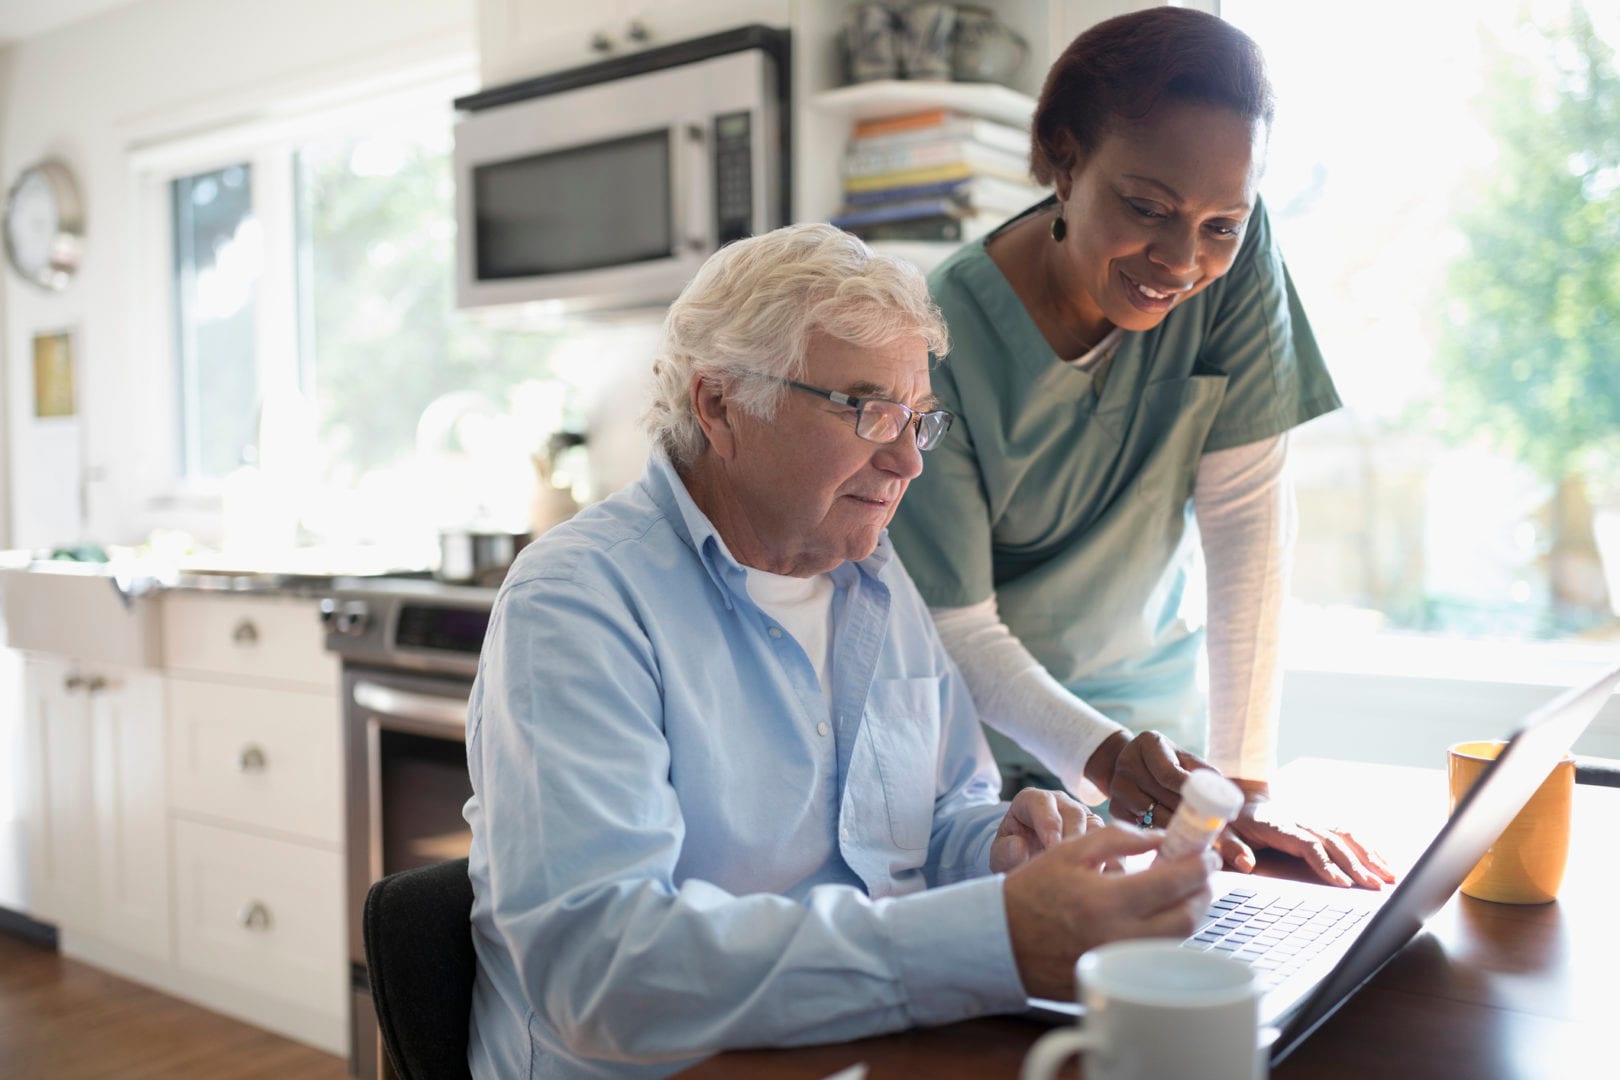 How to become an in-home caregiver: training, pay, and job prospects